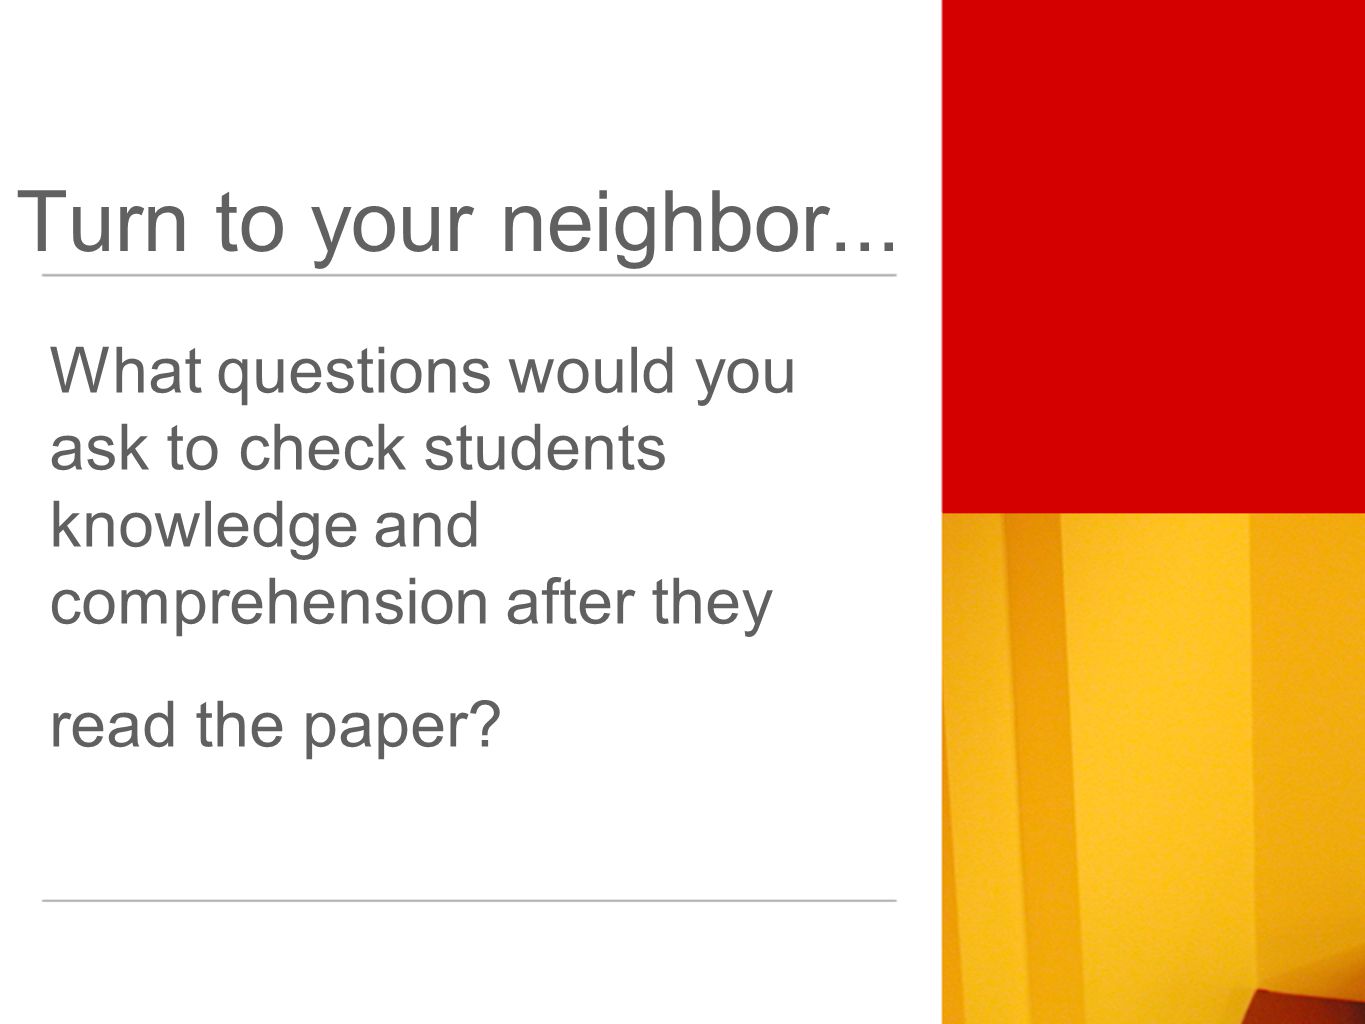 What questions would you ask to check students knowledge and comprehension after they read the paper.